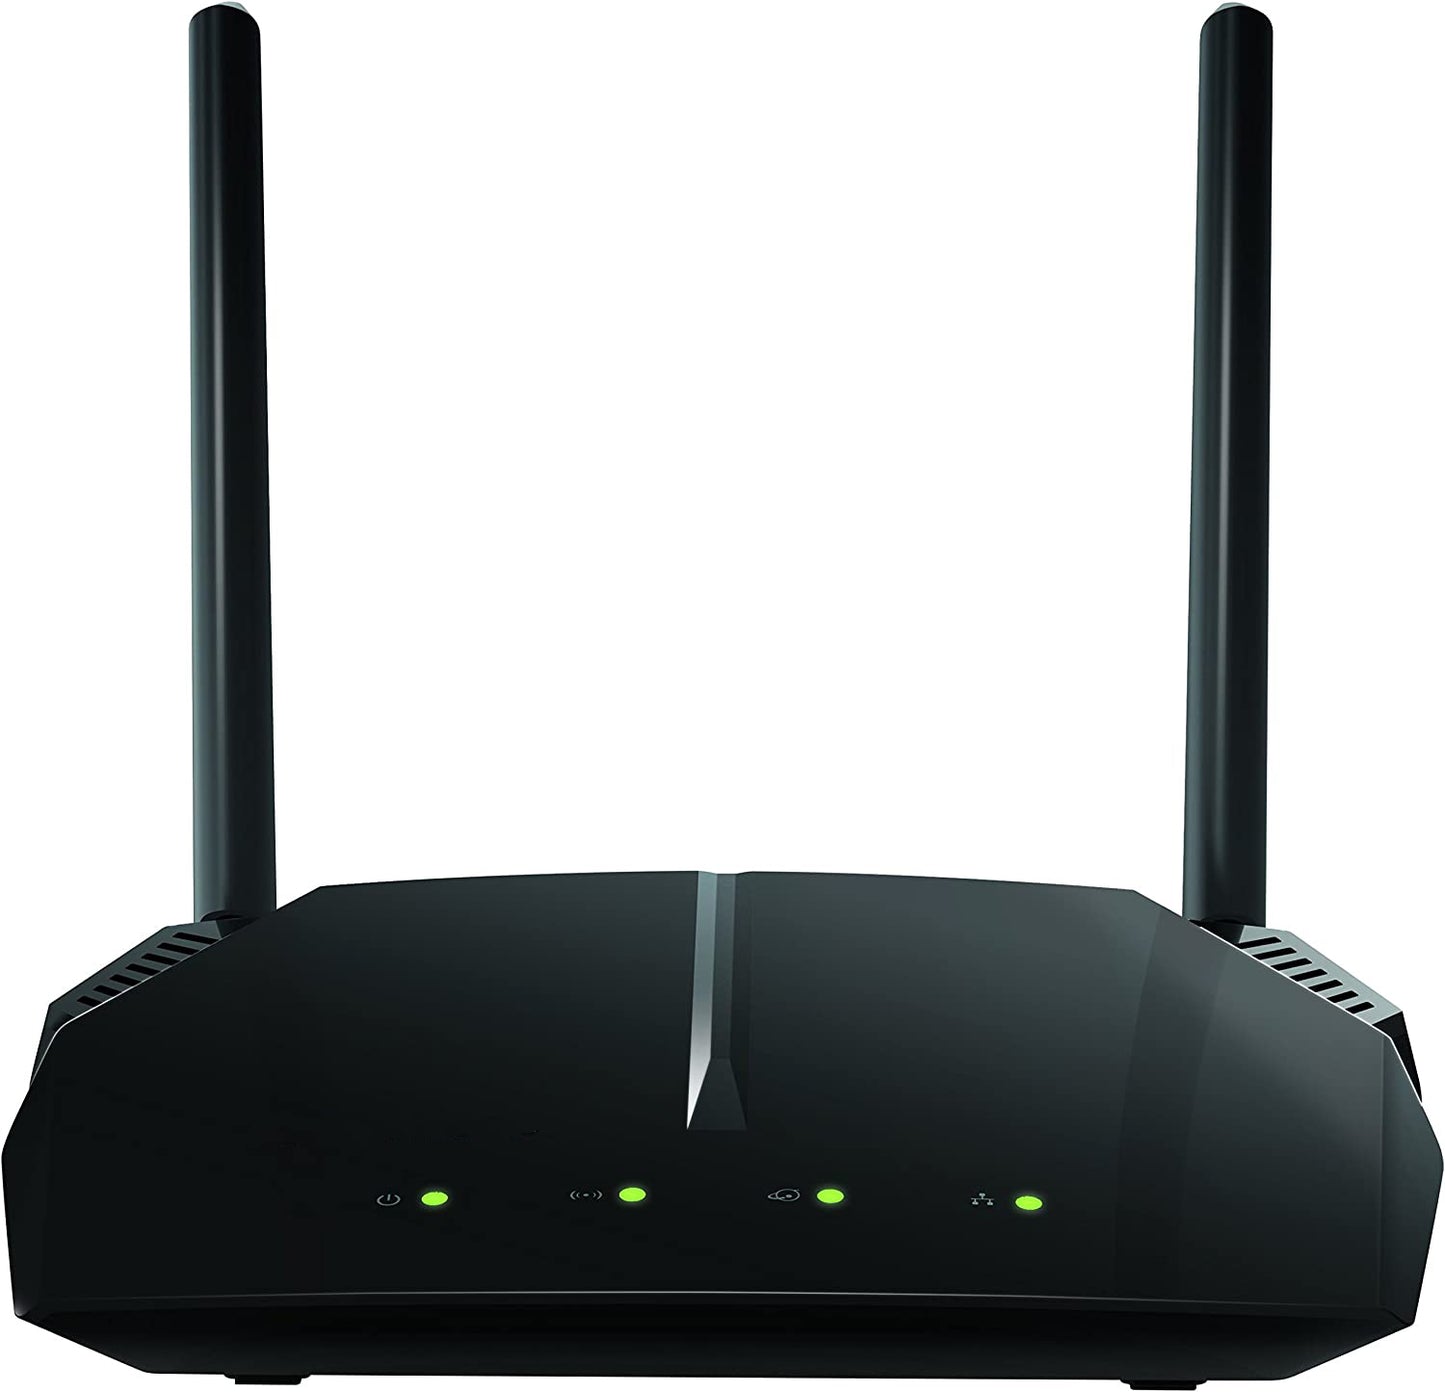 AC1200 WiFi Router Dual Band Wireless Internet Router